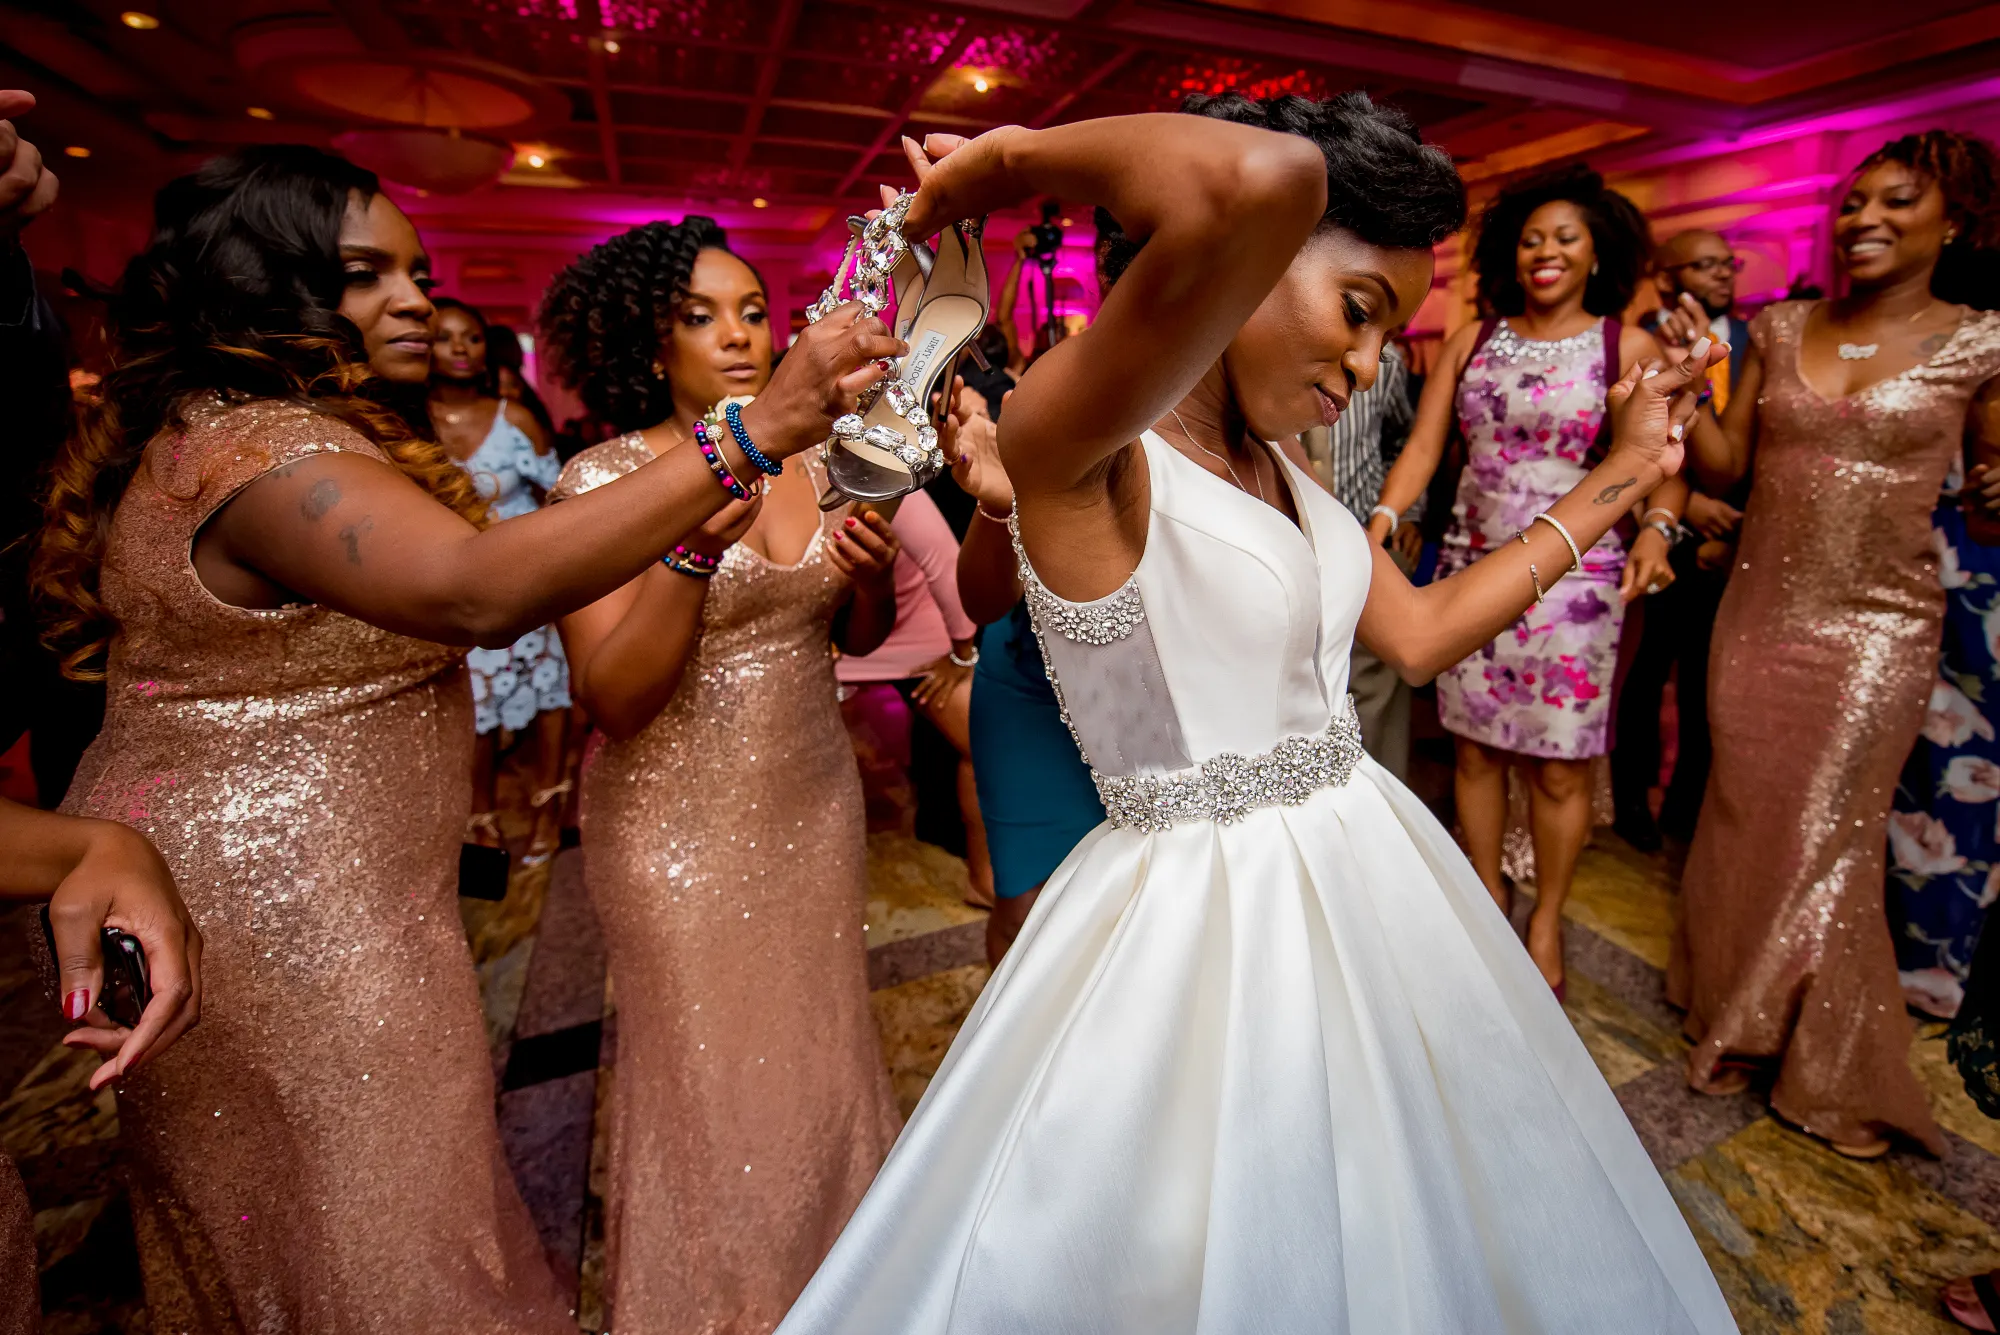 The bride that kicked off her shoes and passed them off to the nearest person so she could dance.